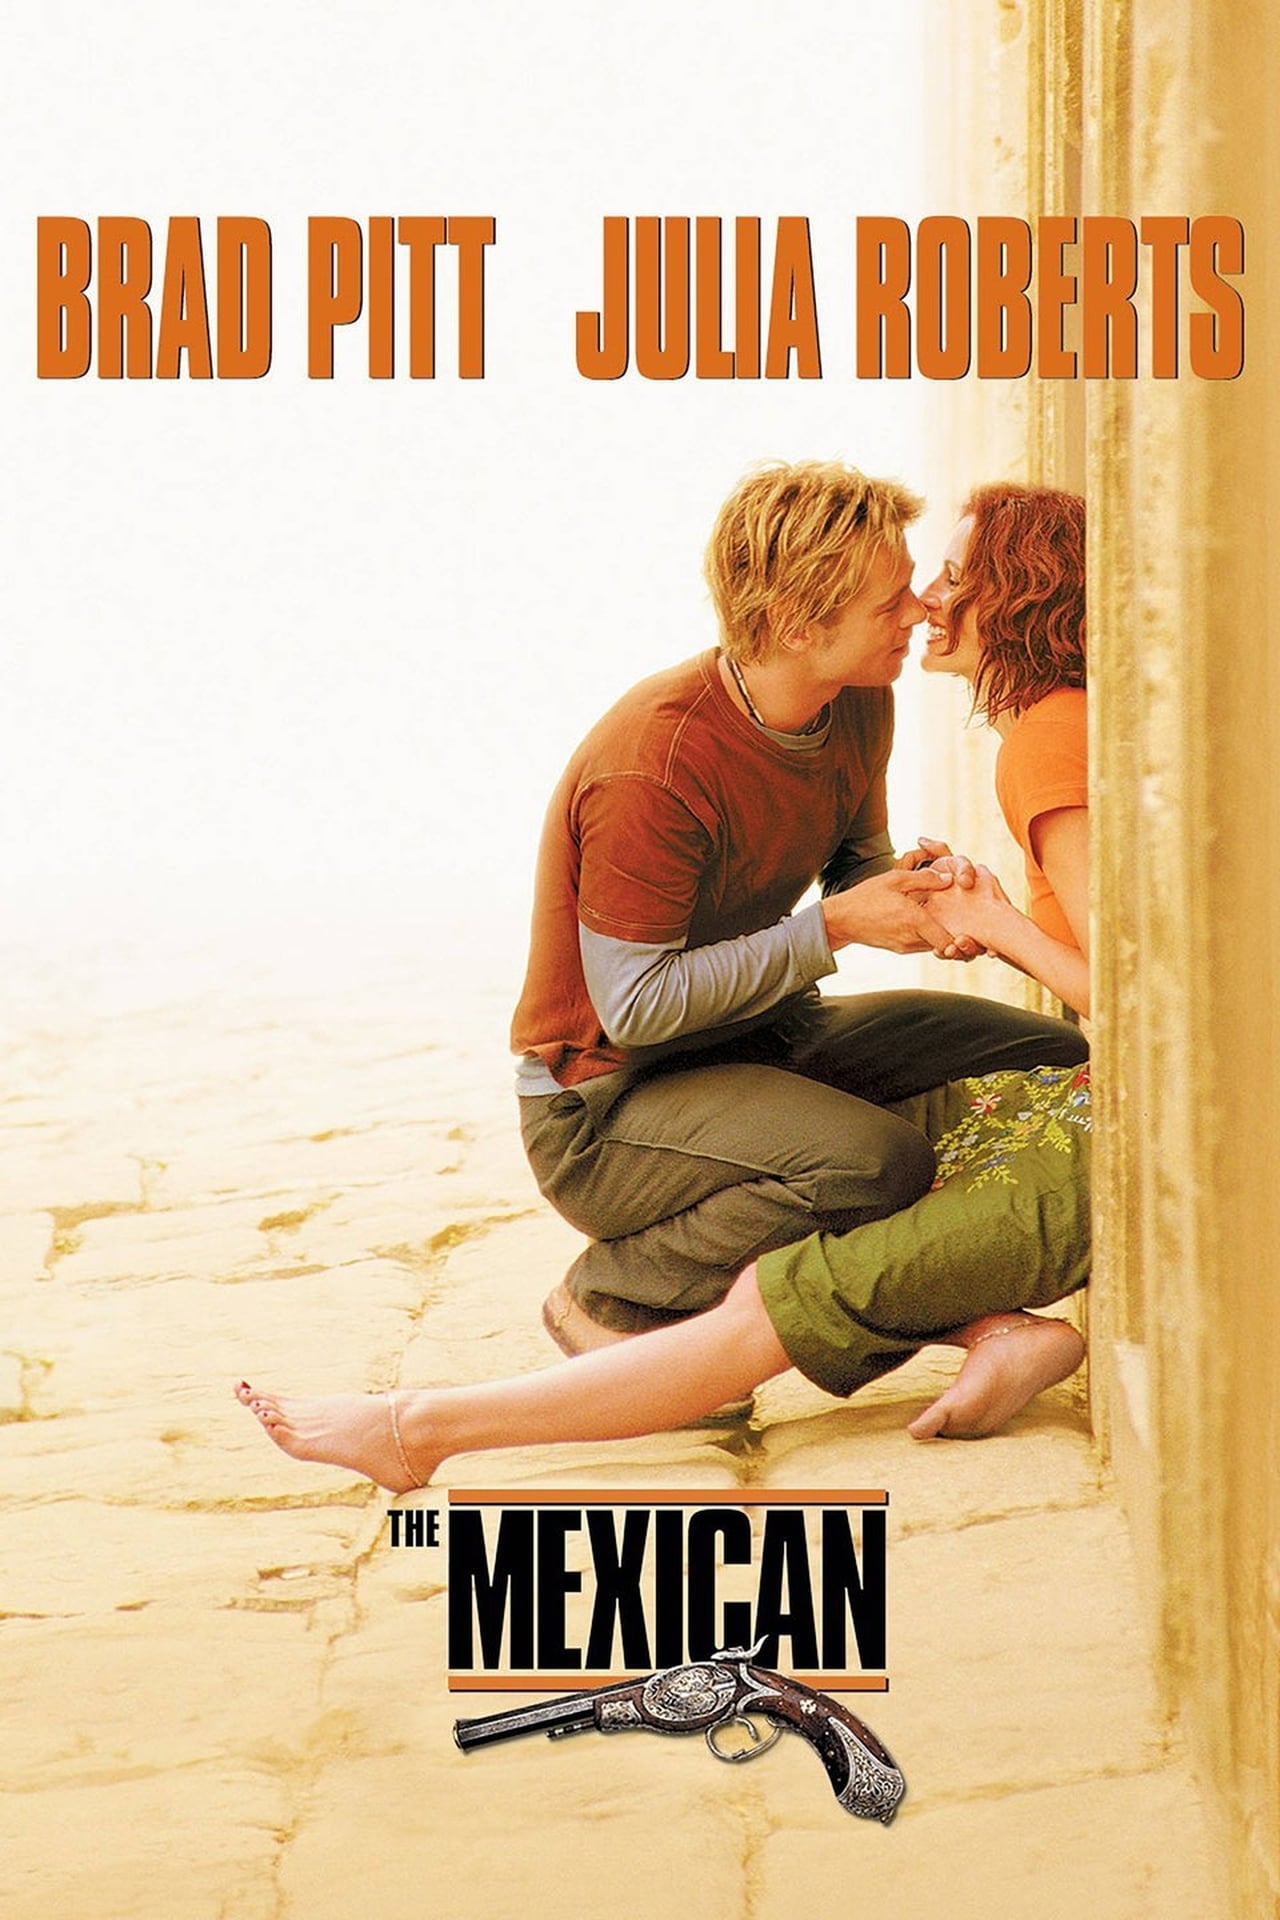 The Mexican (2001) 640Kbps 23.976Fps 48Khz 5.1Ch BluRay Turkish Audio TAC